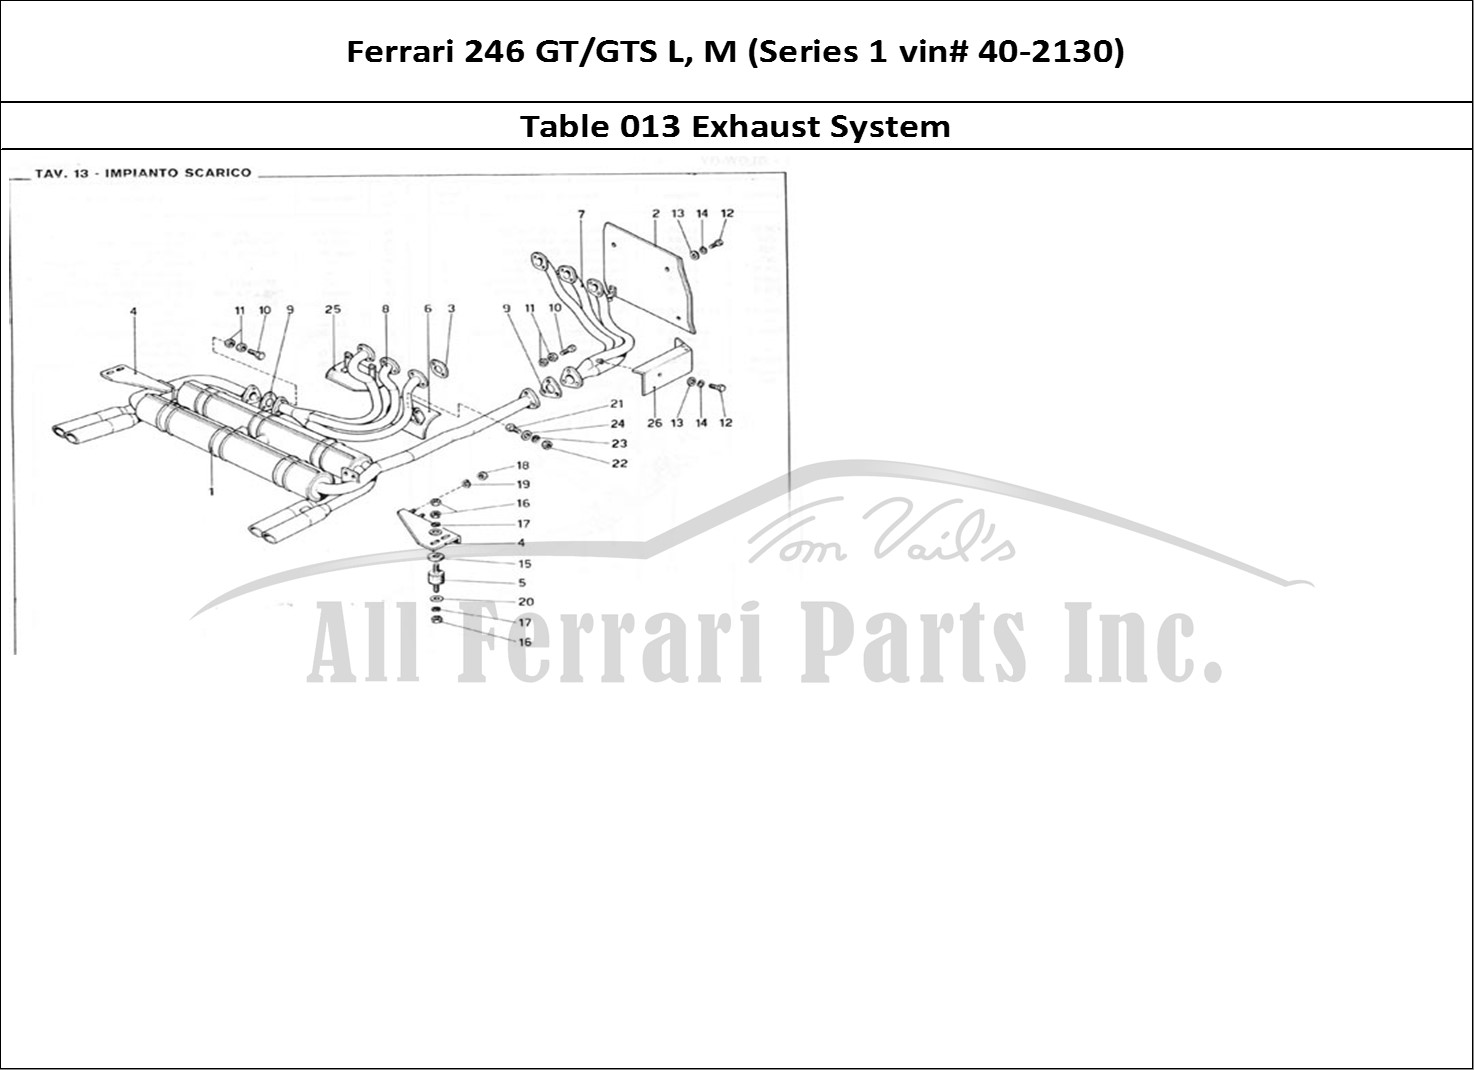 Ferrari Parts Ferrari 246 GT Series 1 Page 013 Exhaust Pipes Assembly